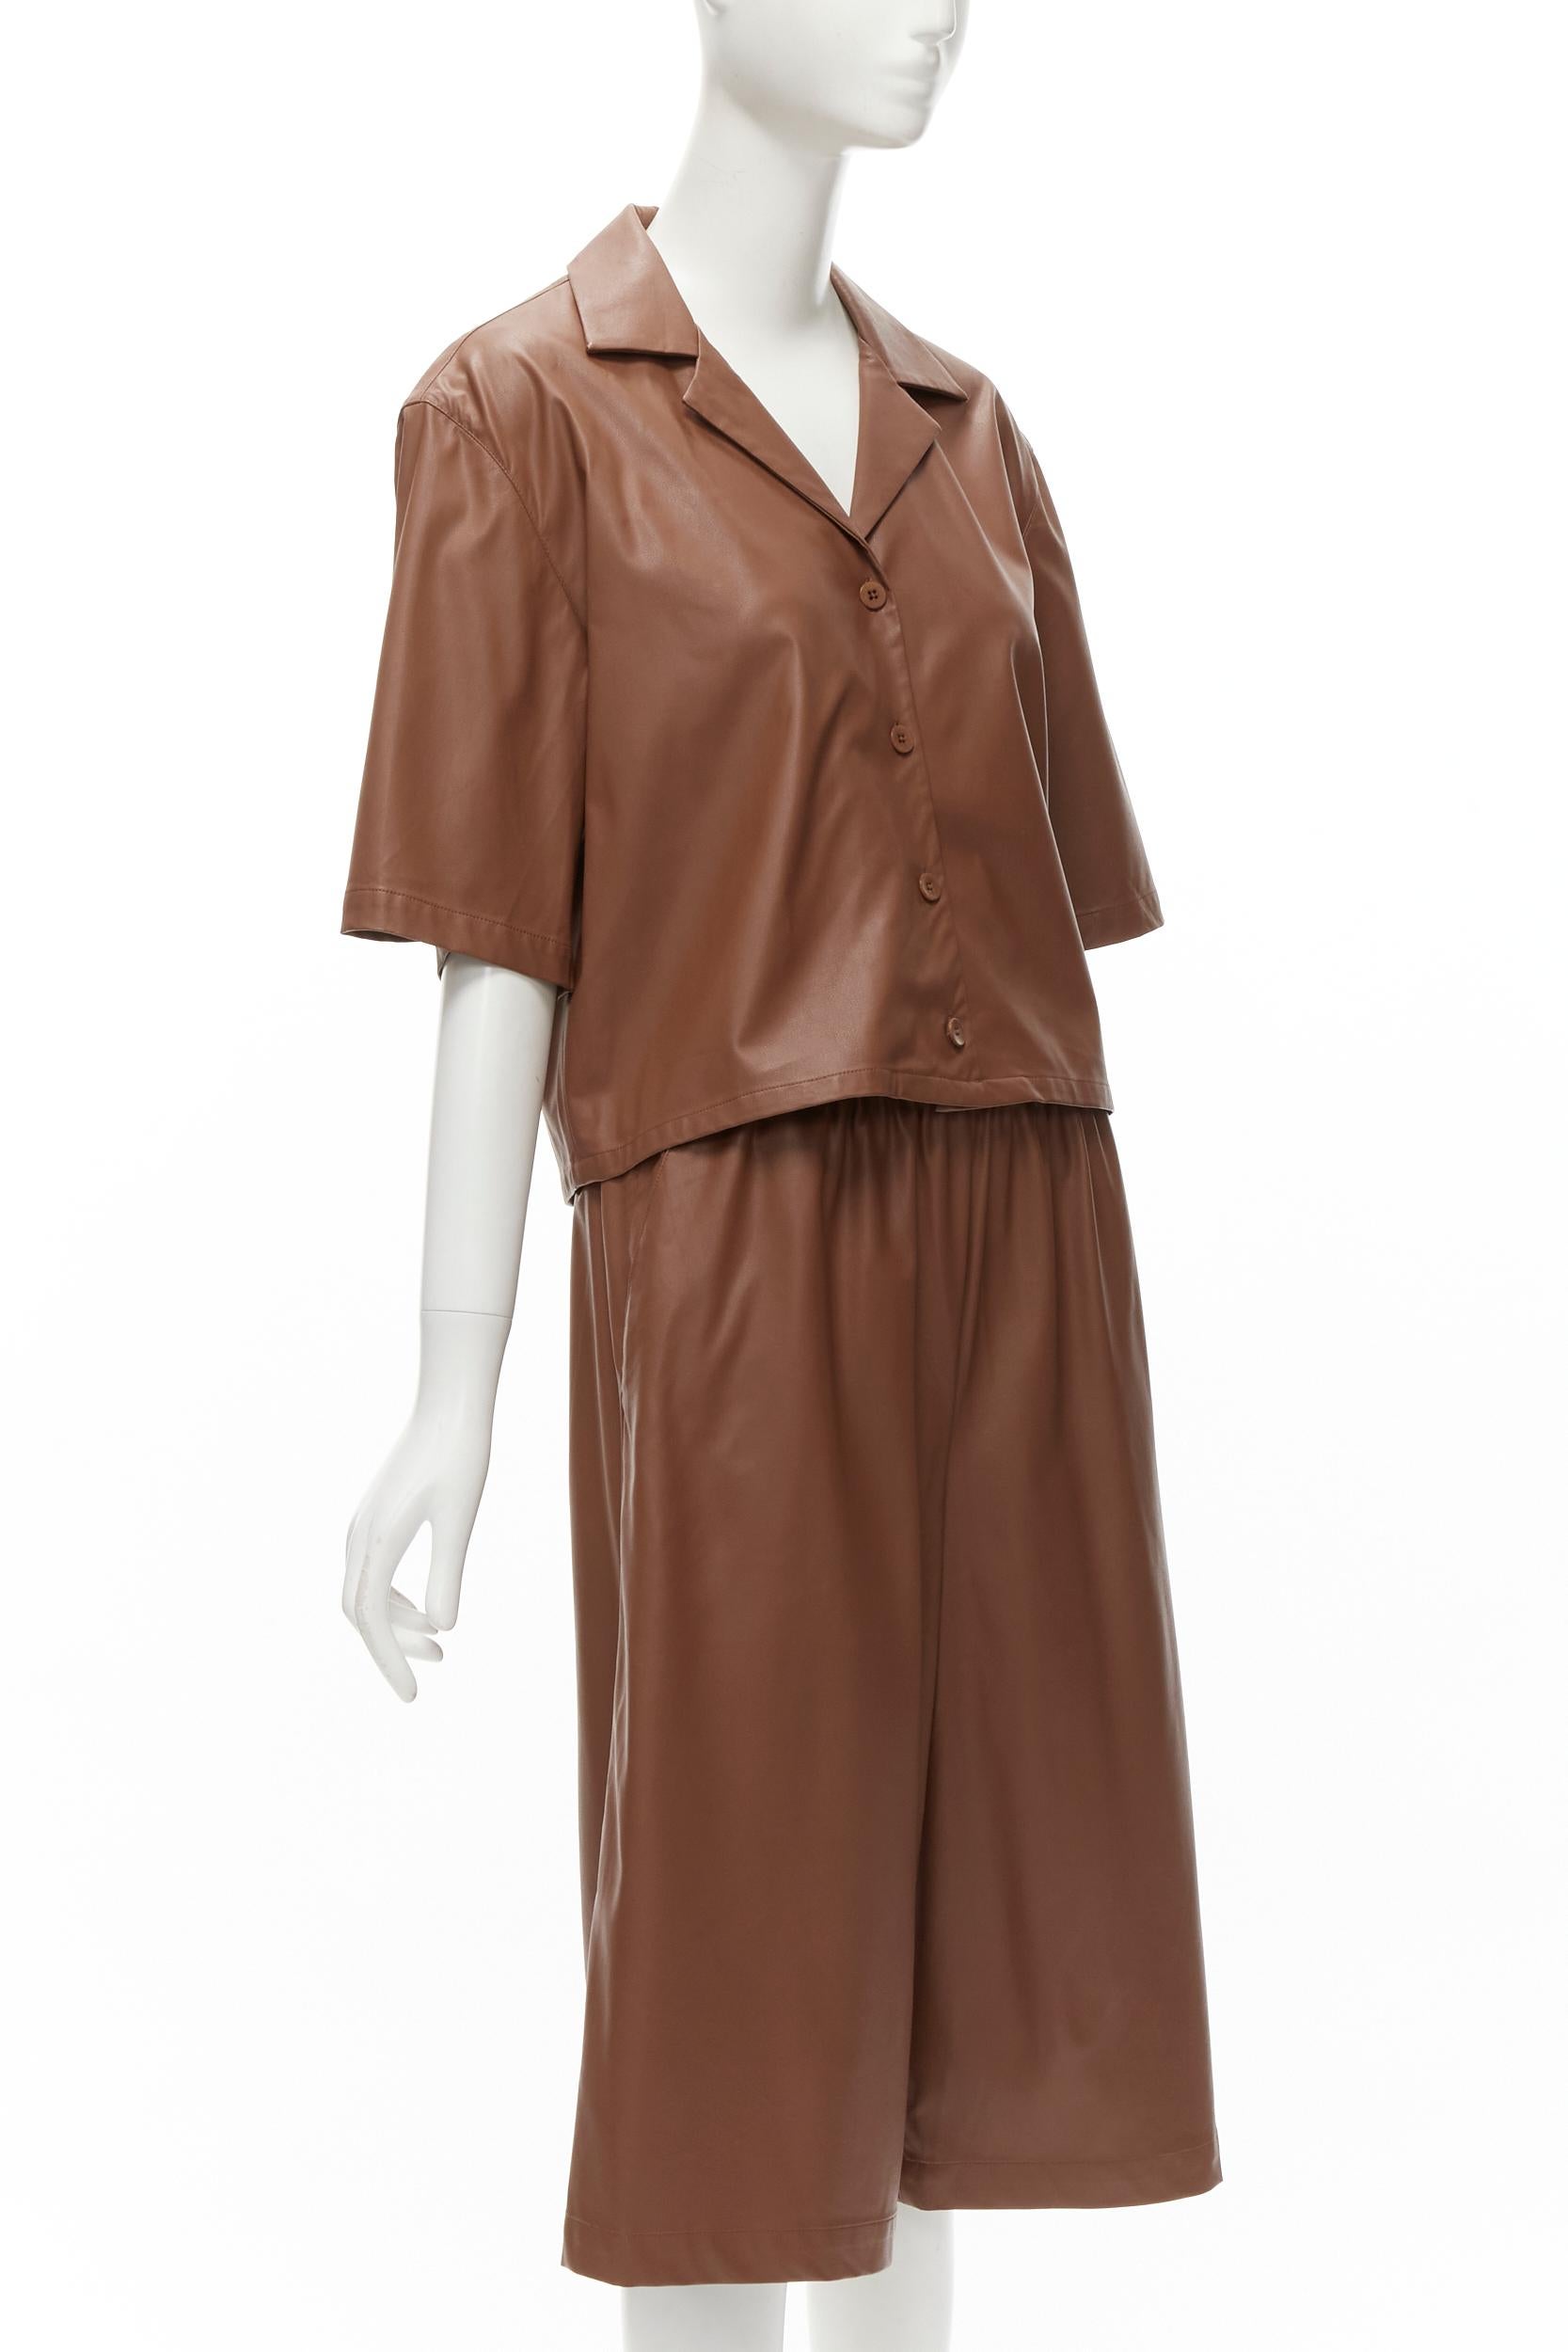 TIBI brown faux leather boxy fit shirt culotte wide shorts S
Reference: YNWG/A00116
Brand: Tibi
Material: Faux Leather
Color: Brown
Pattern: Solid
Closure: Button
Lining: Fabric
Extra Details: Elasticated waistband for pants.
Made in: